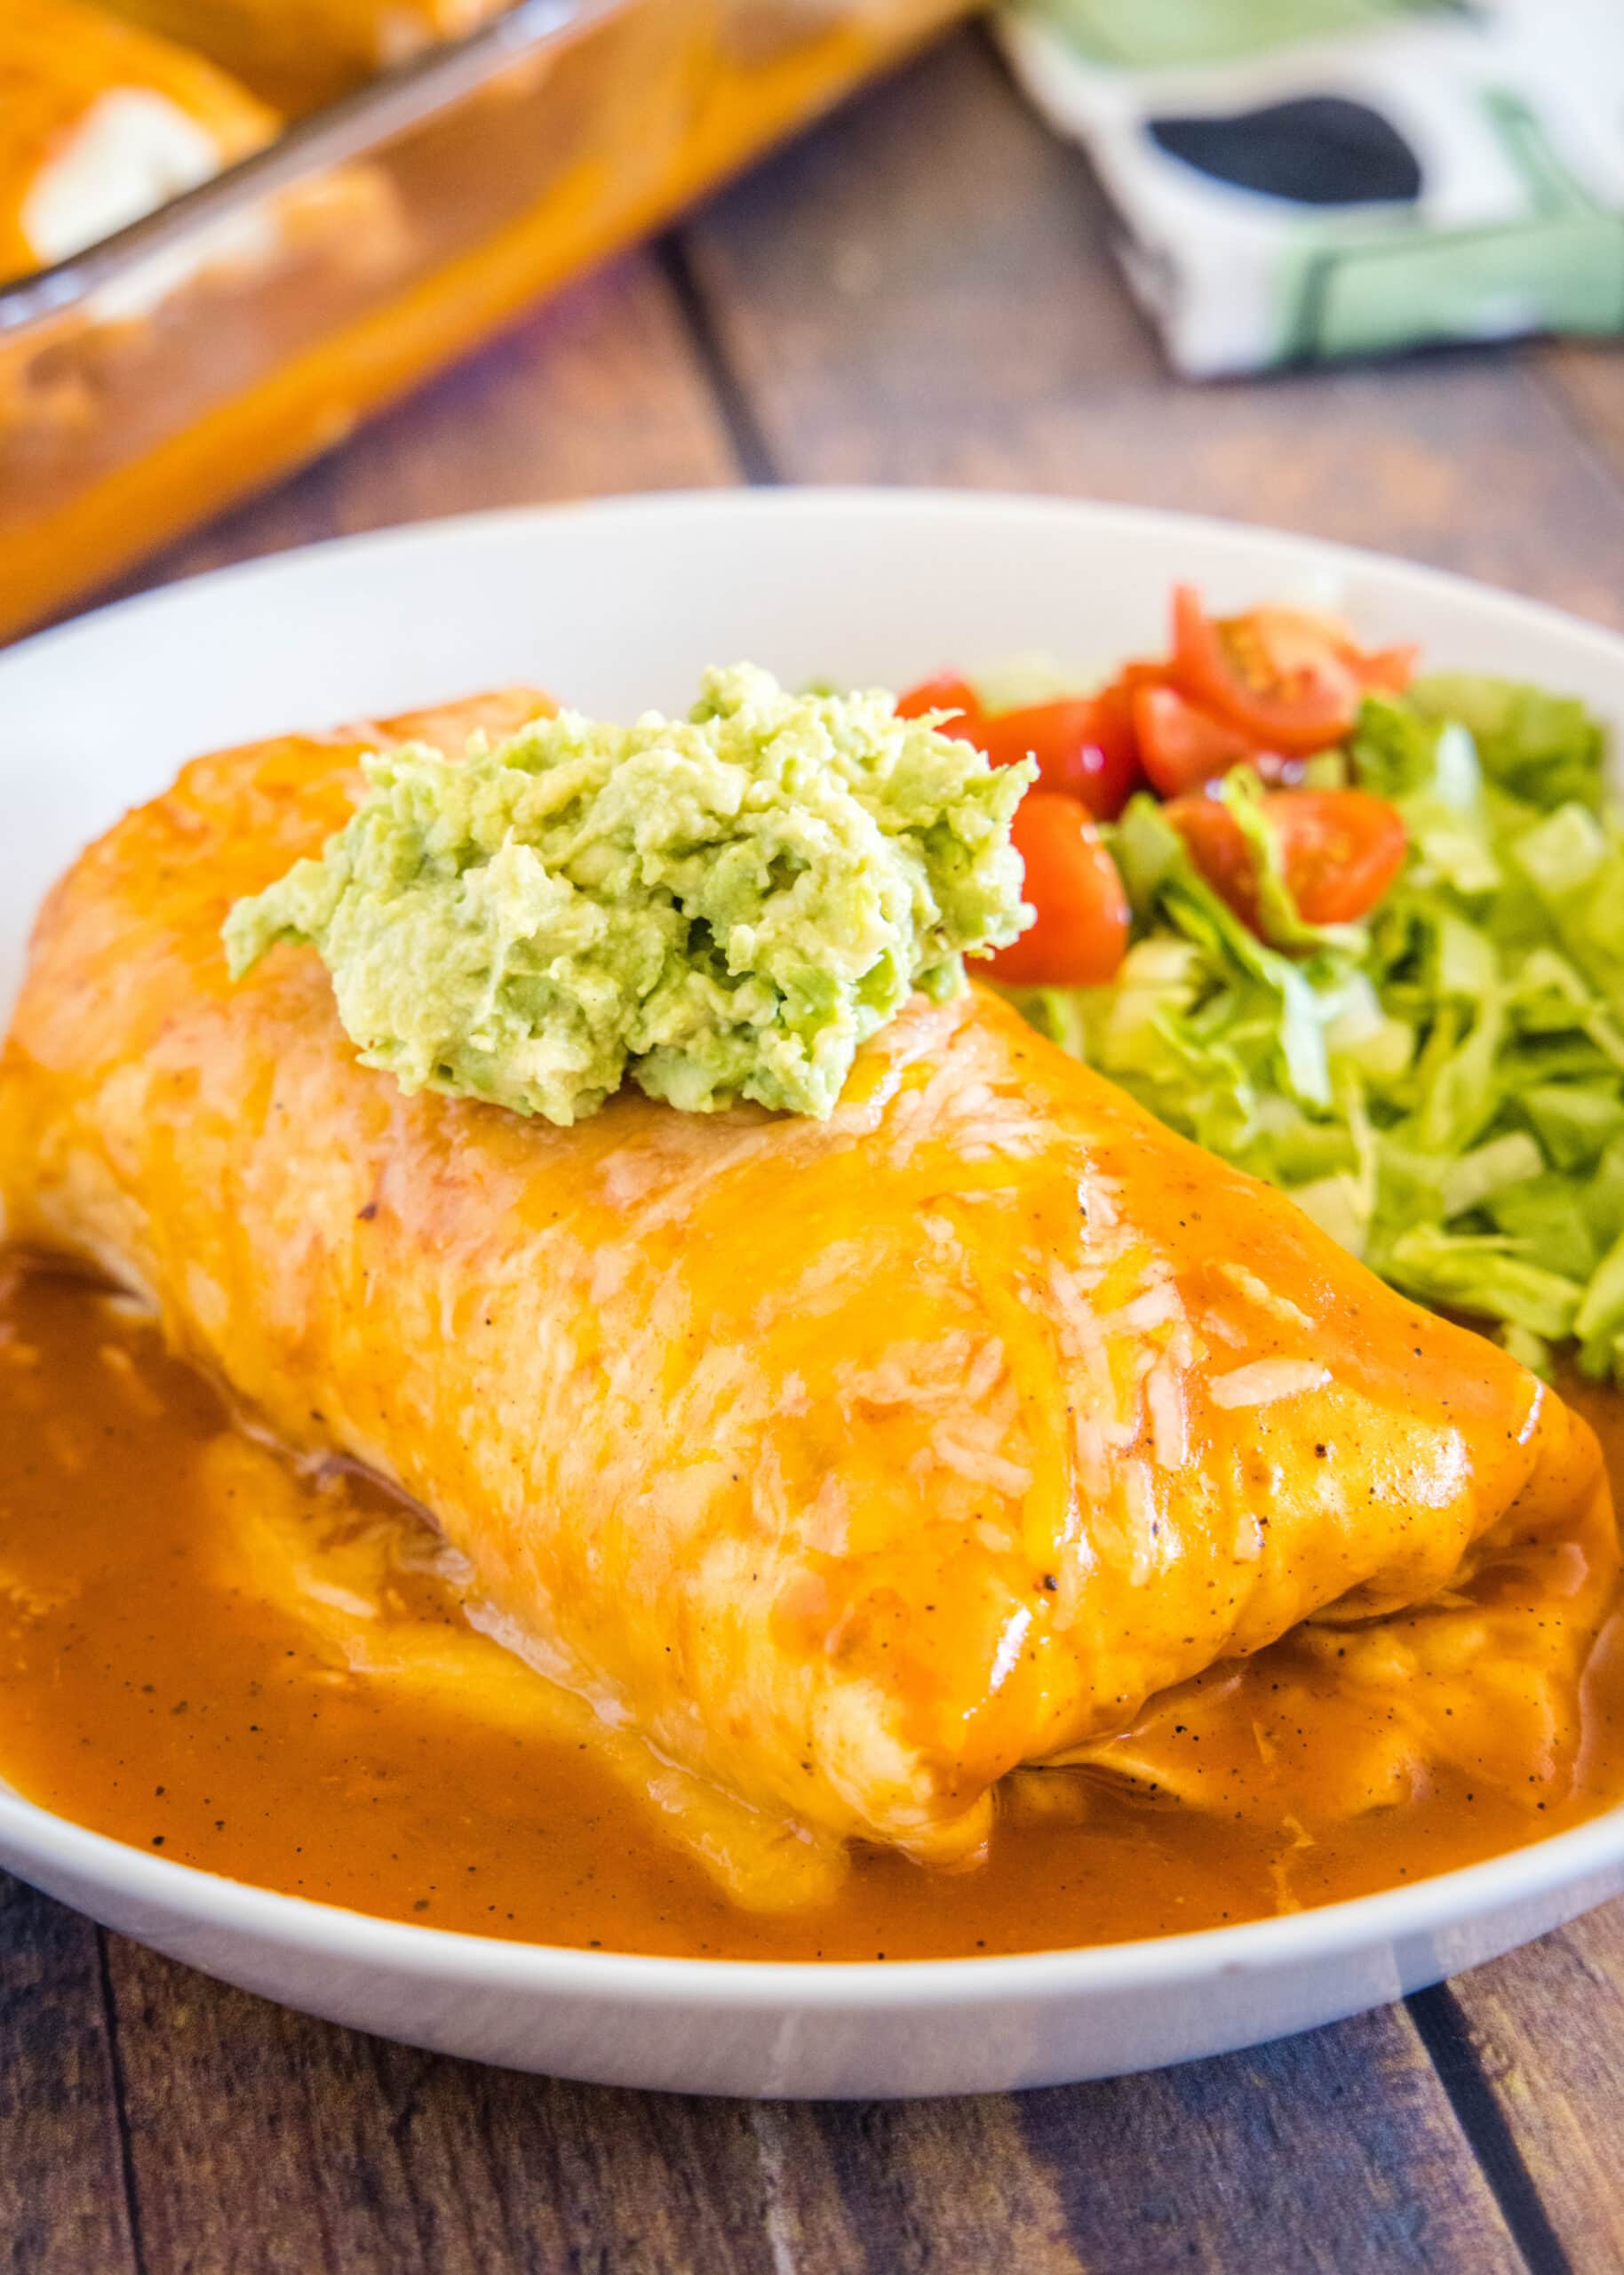 A wet burrito on a plate topped with guacamole, with a salad of lettuce and tomatoes in the background.